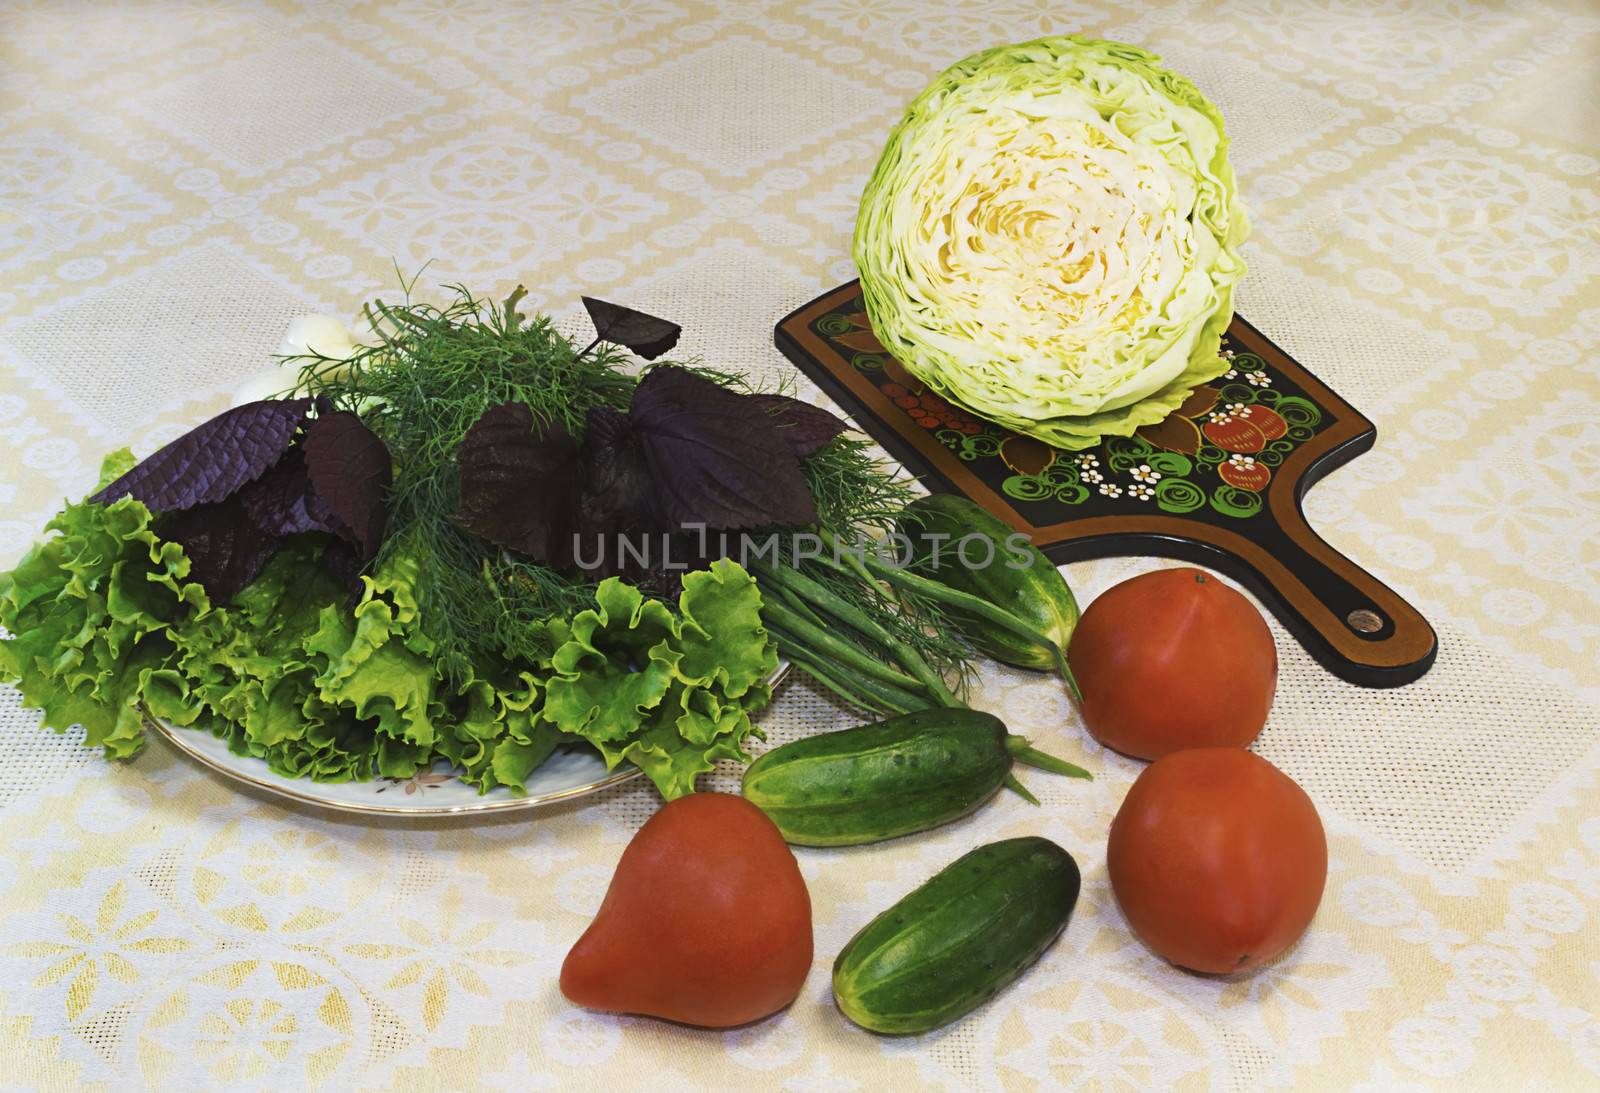 Lettuce, dill, onions on a white plate and vegetables ( tomatoes, cucumbers, cabbage).
